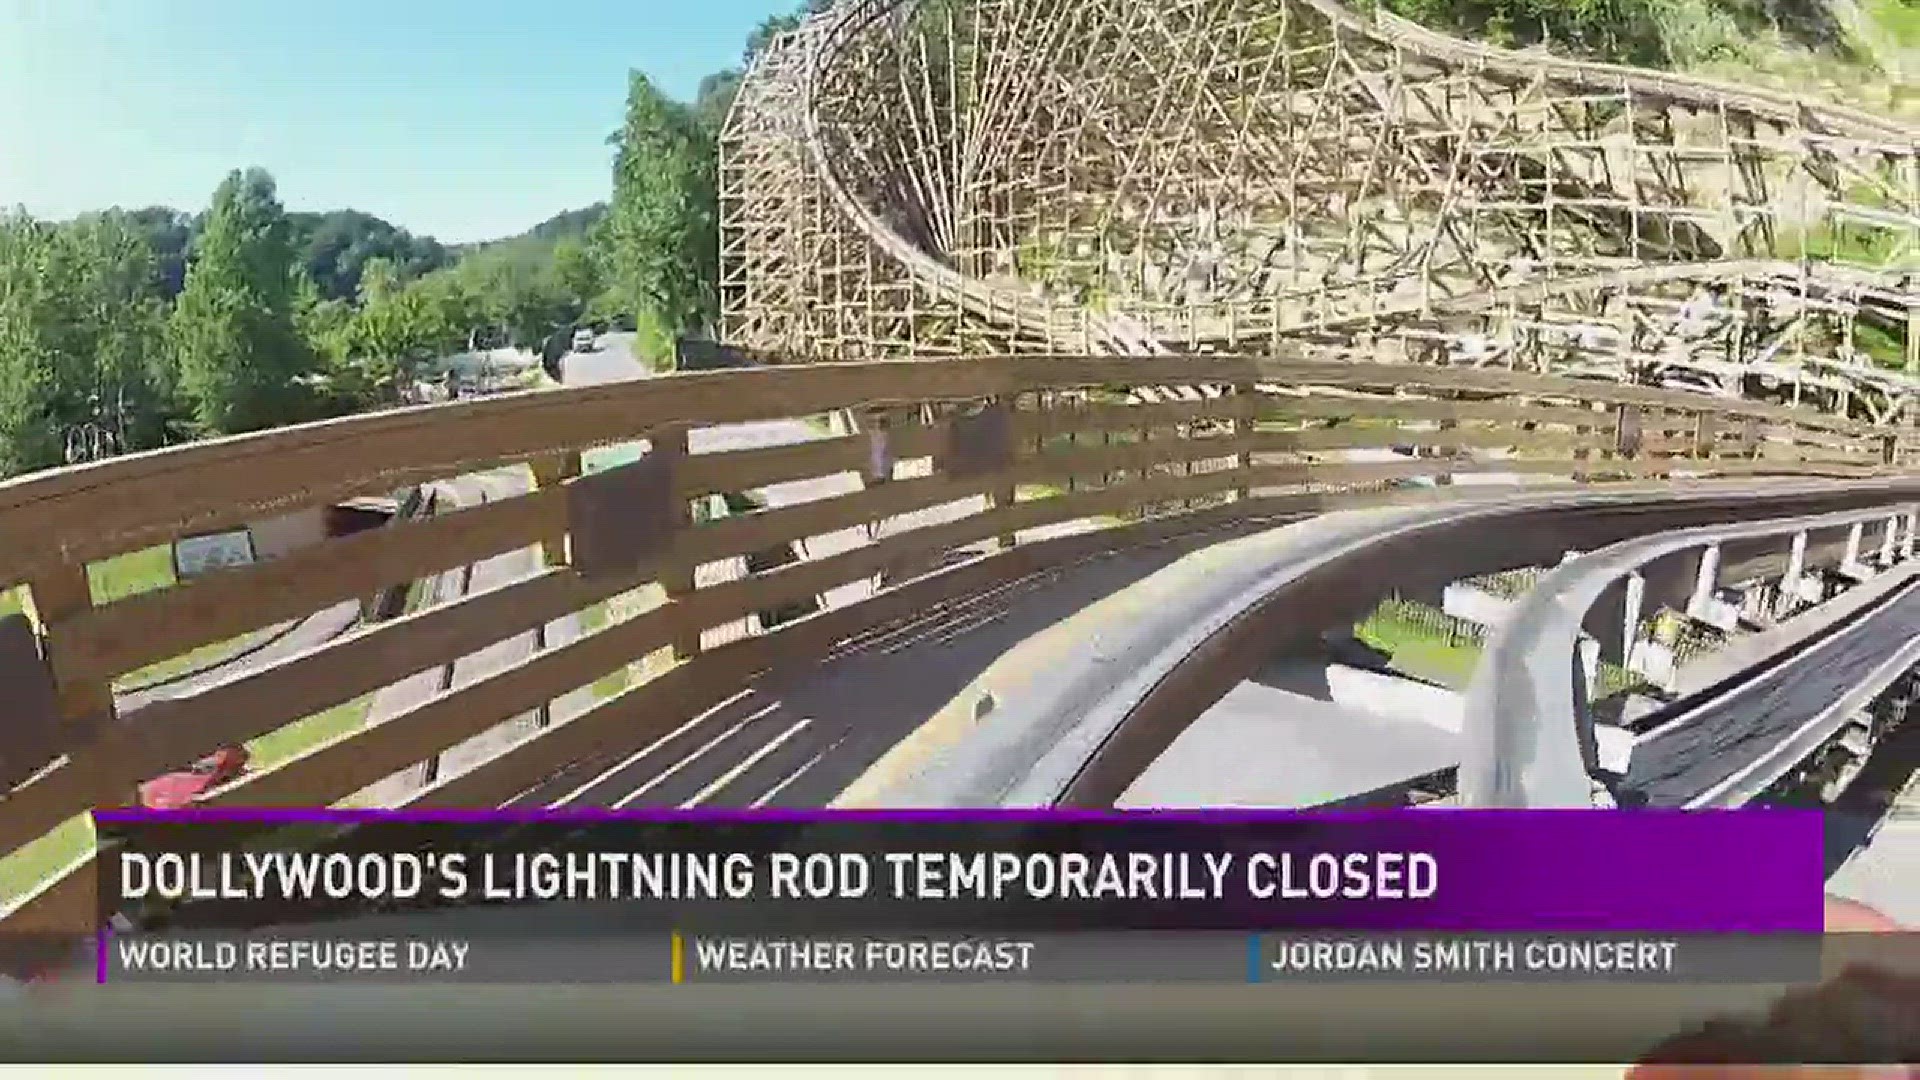 Dollywood's Lightning Rod temporarily closed